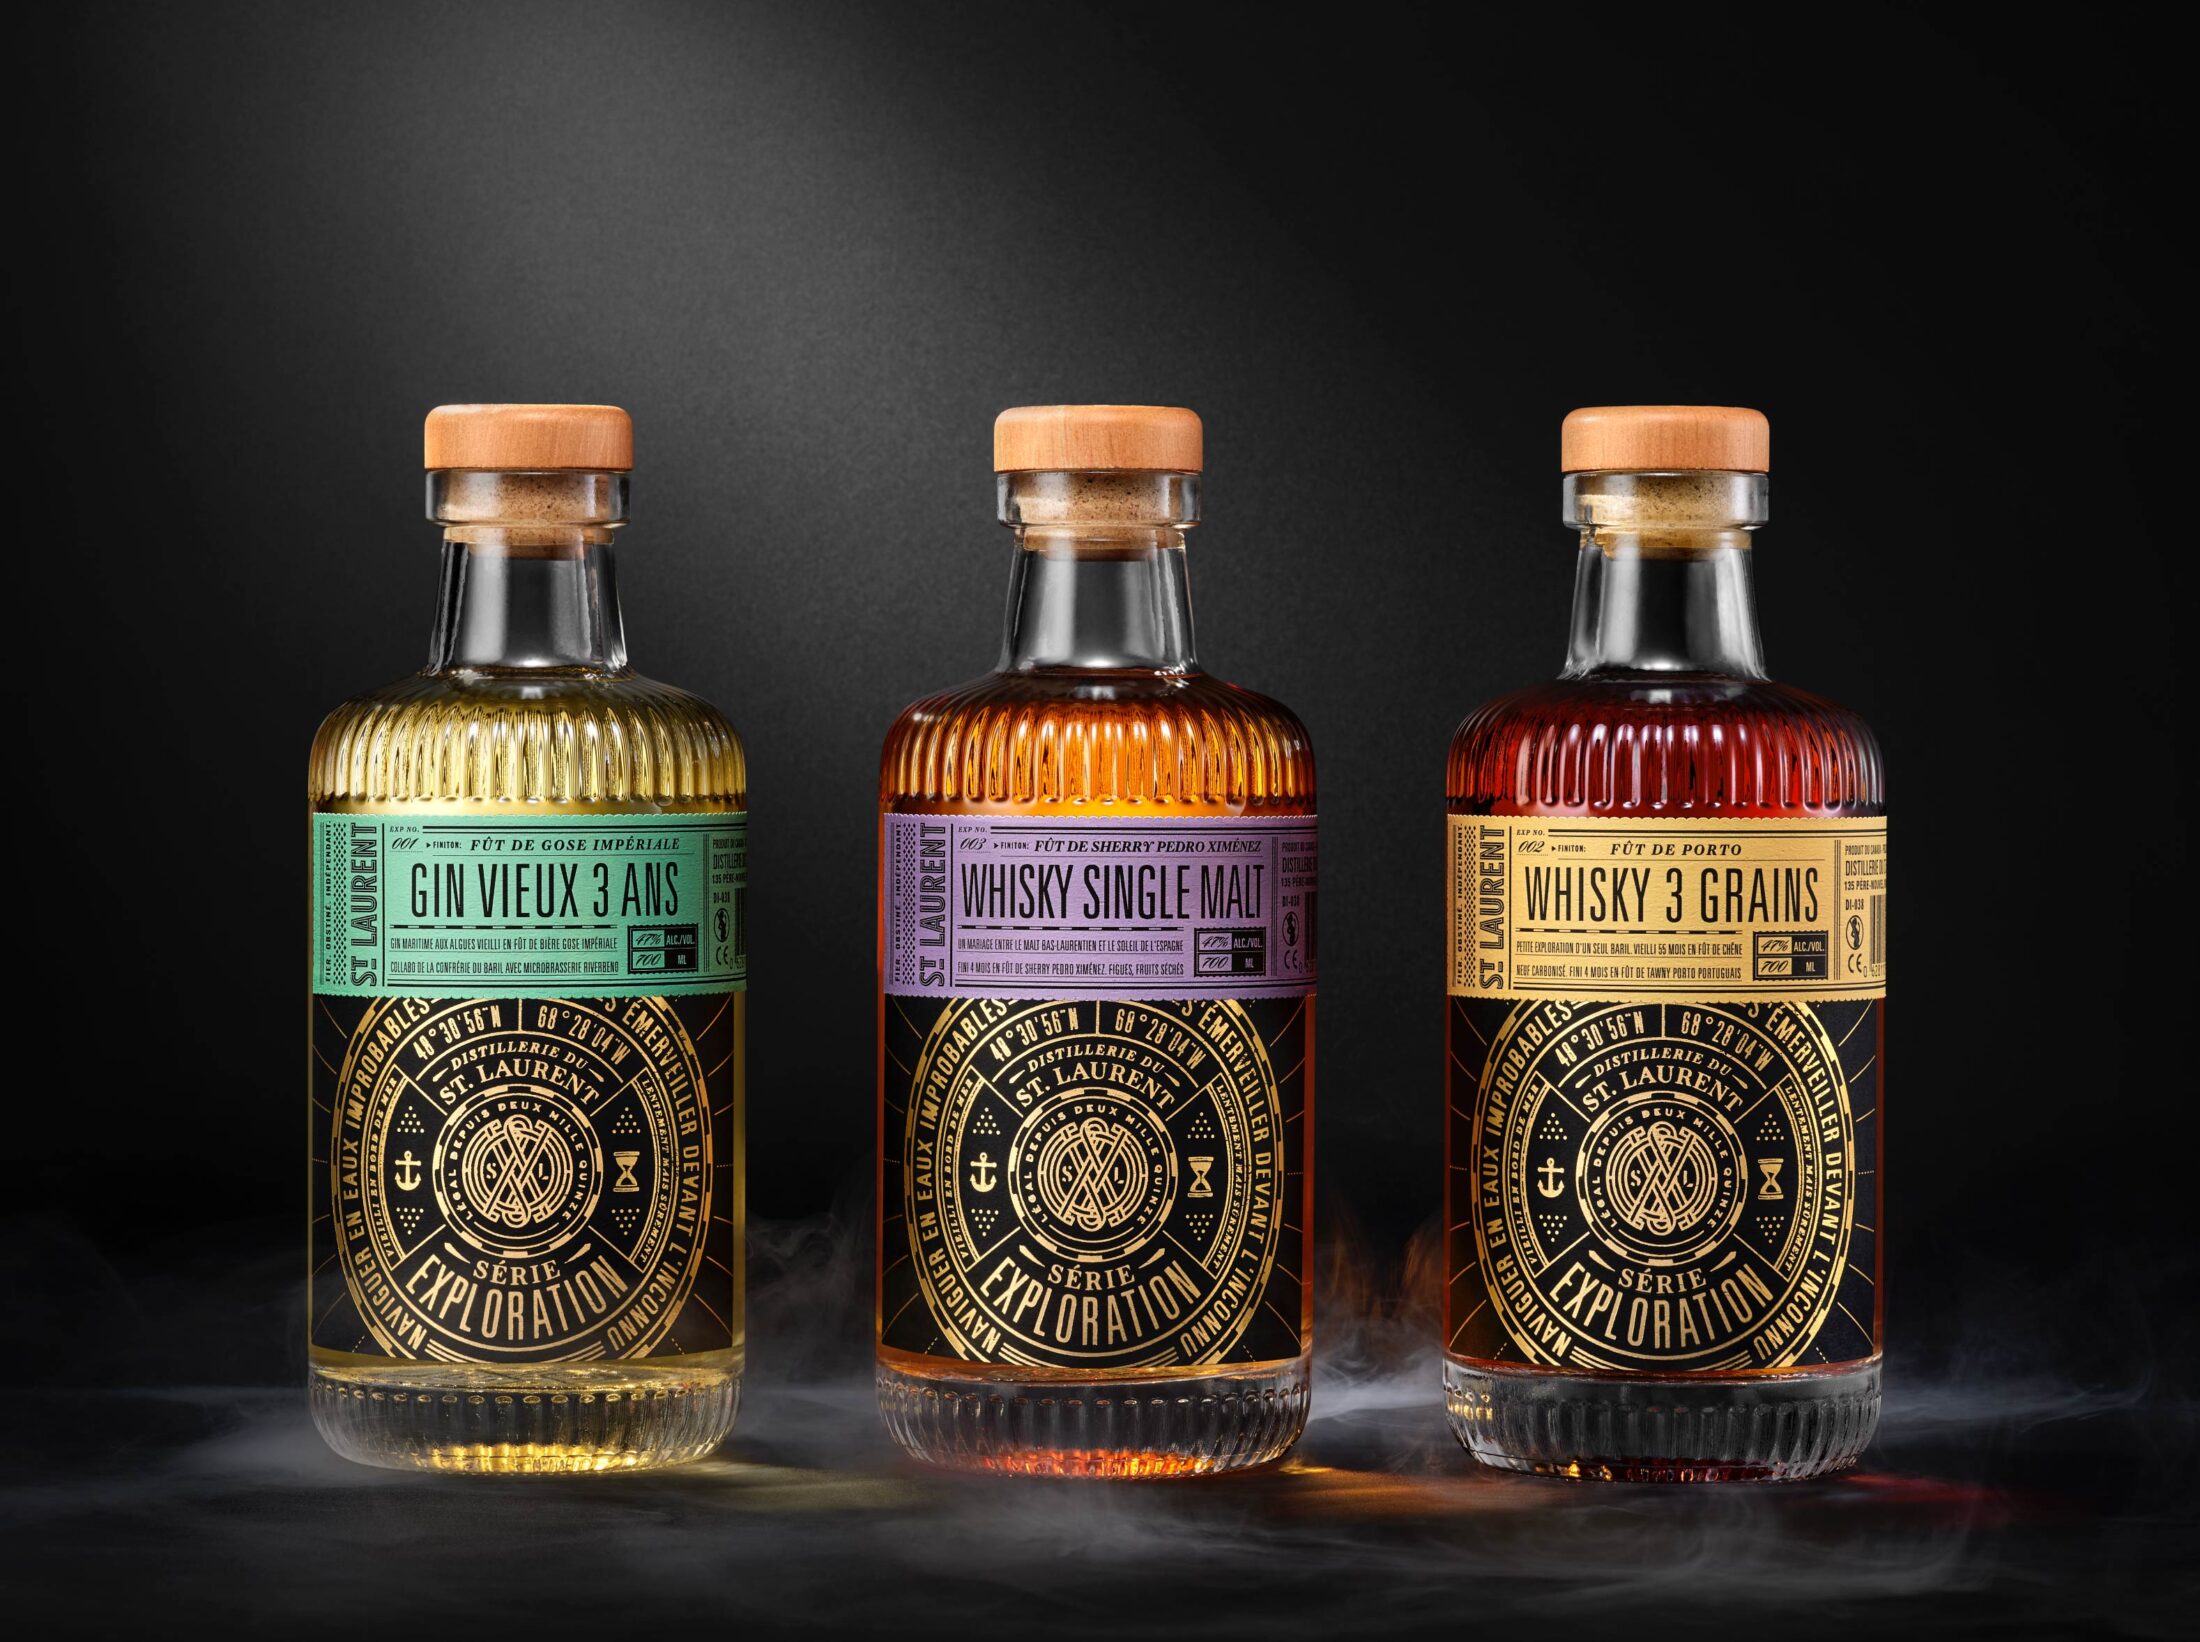 St. Laurent Exploration Series whiskey gin package design